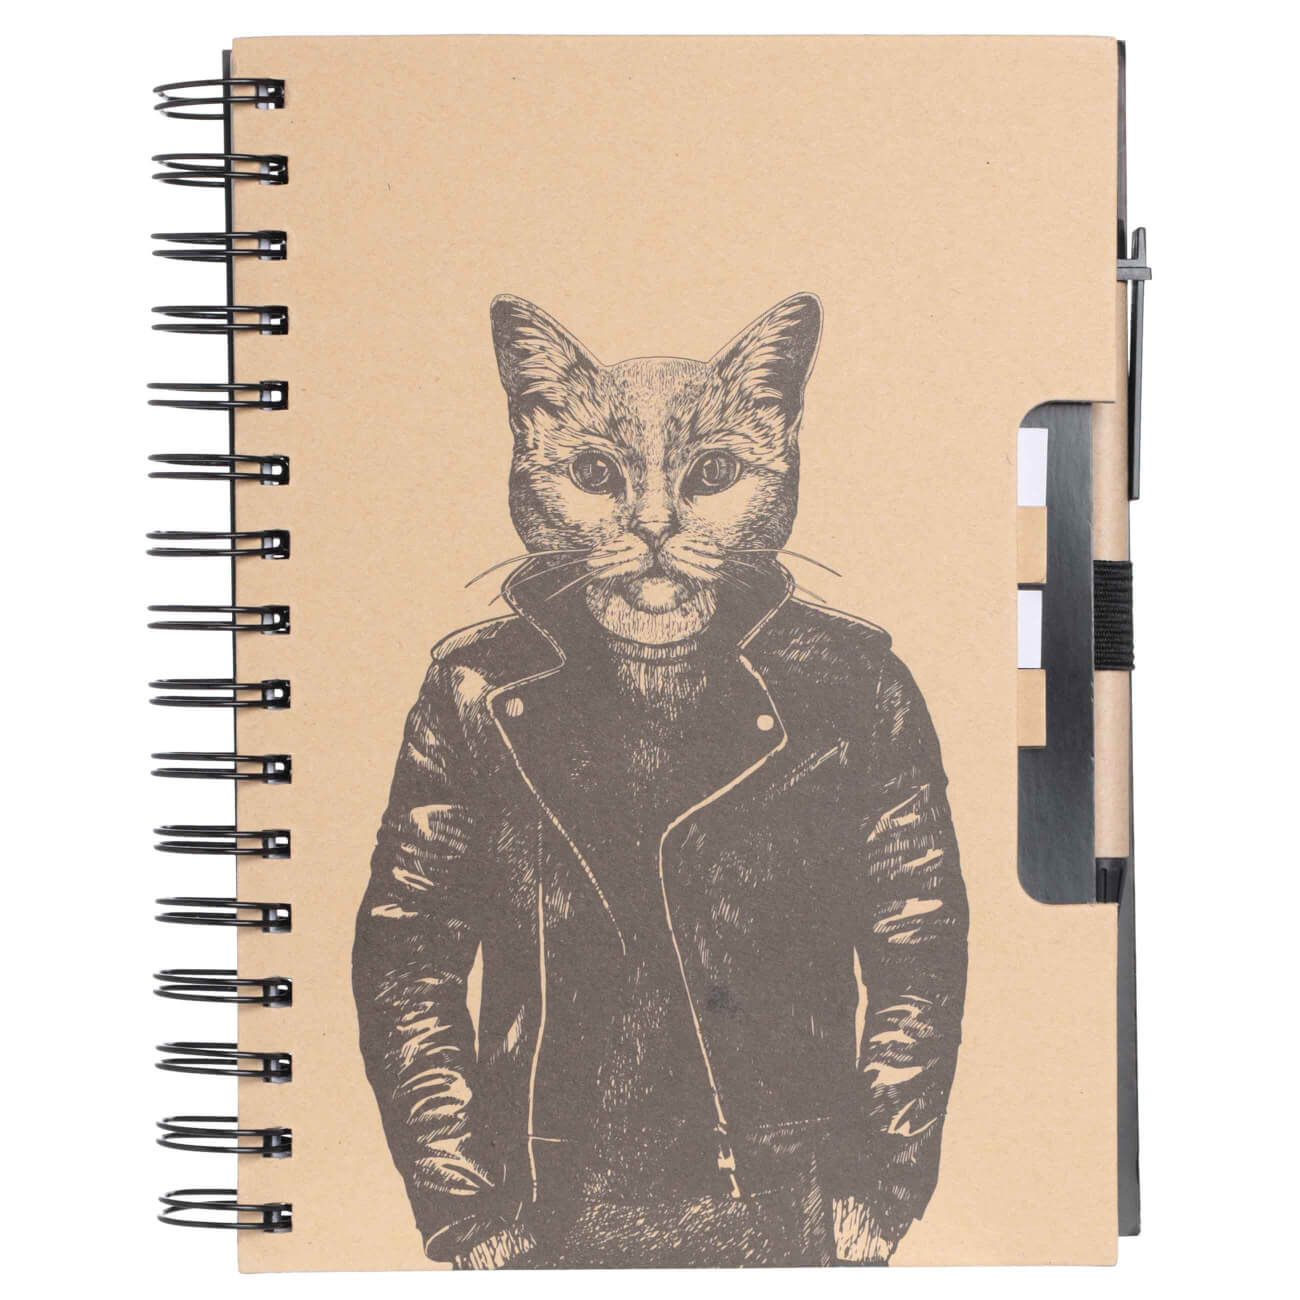 Notepad for notes, with pen, 21x15 cm, 96 l, on rings, cardboard, Cat in a leather jacket, Brutal style изображение № 1